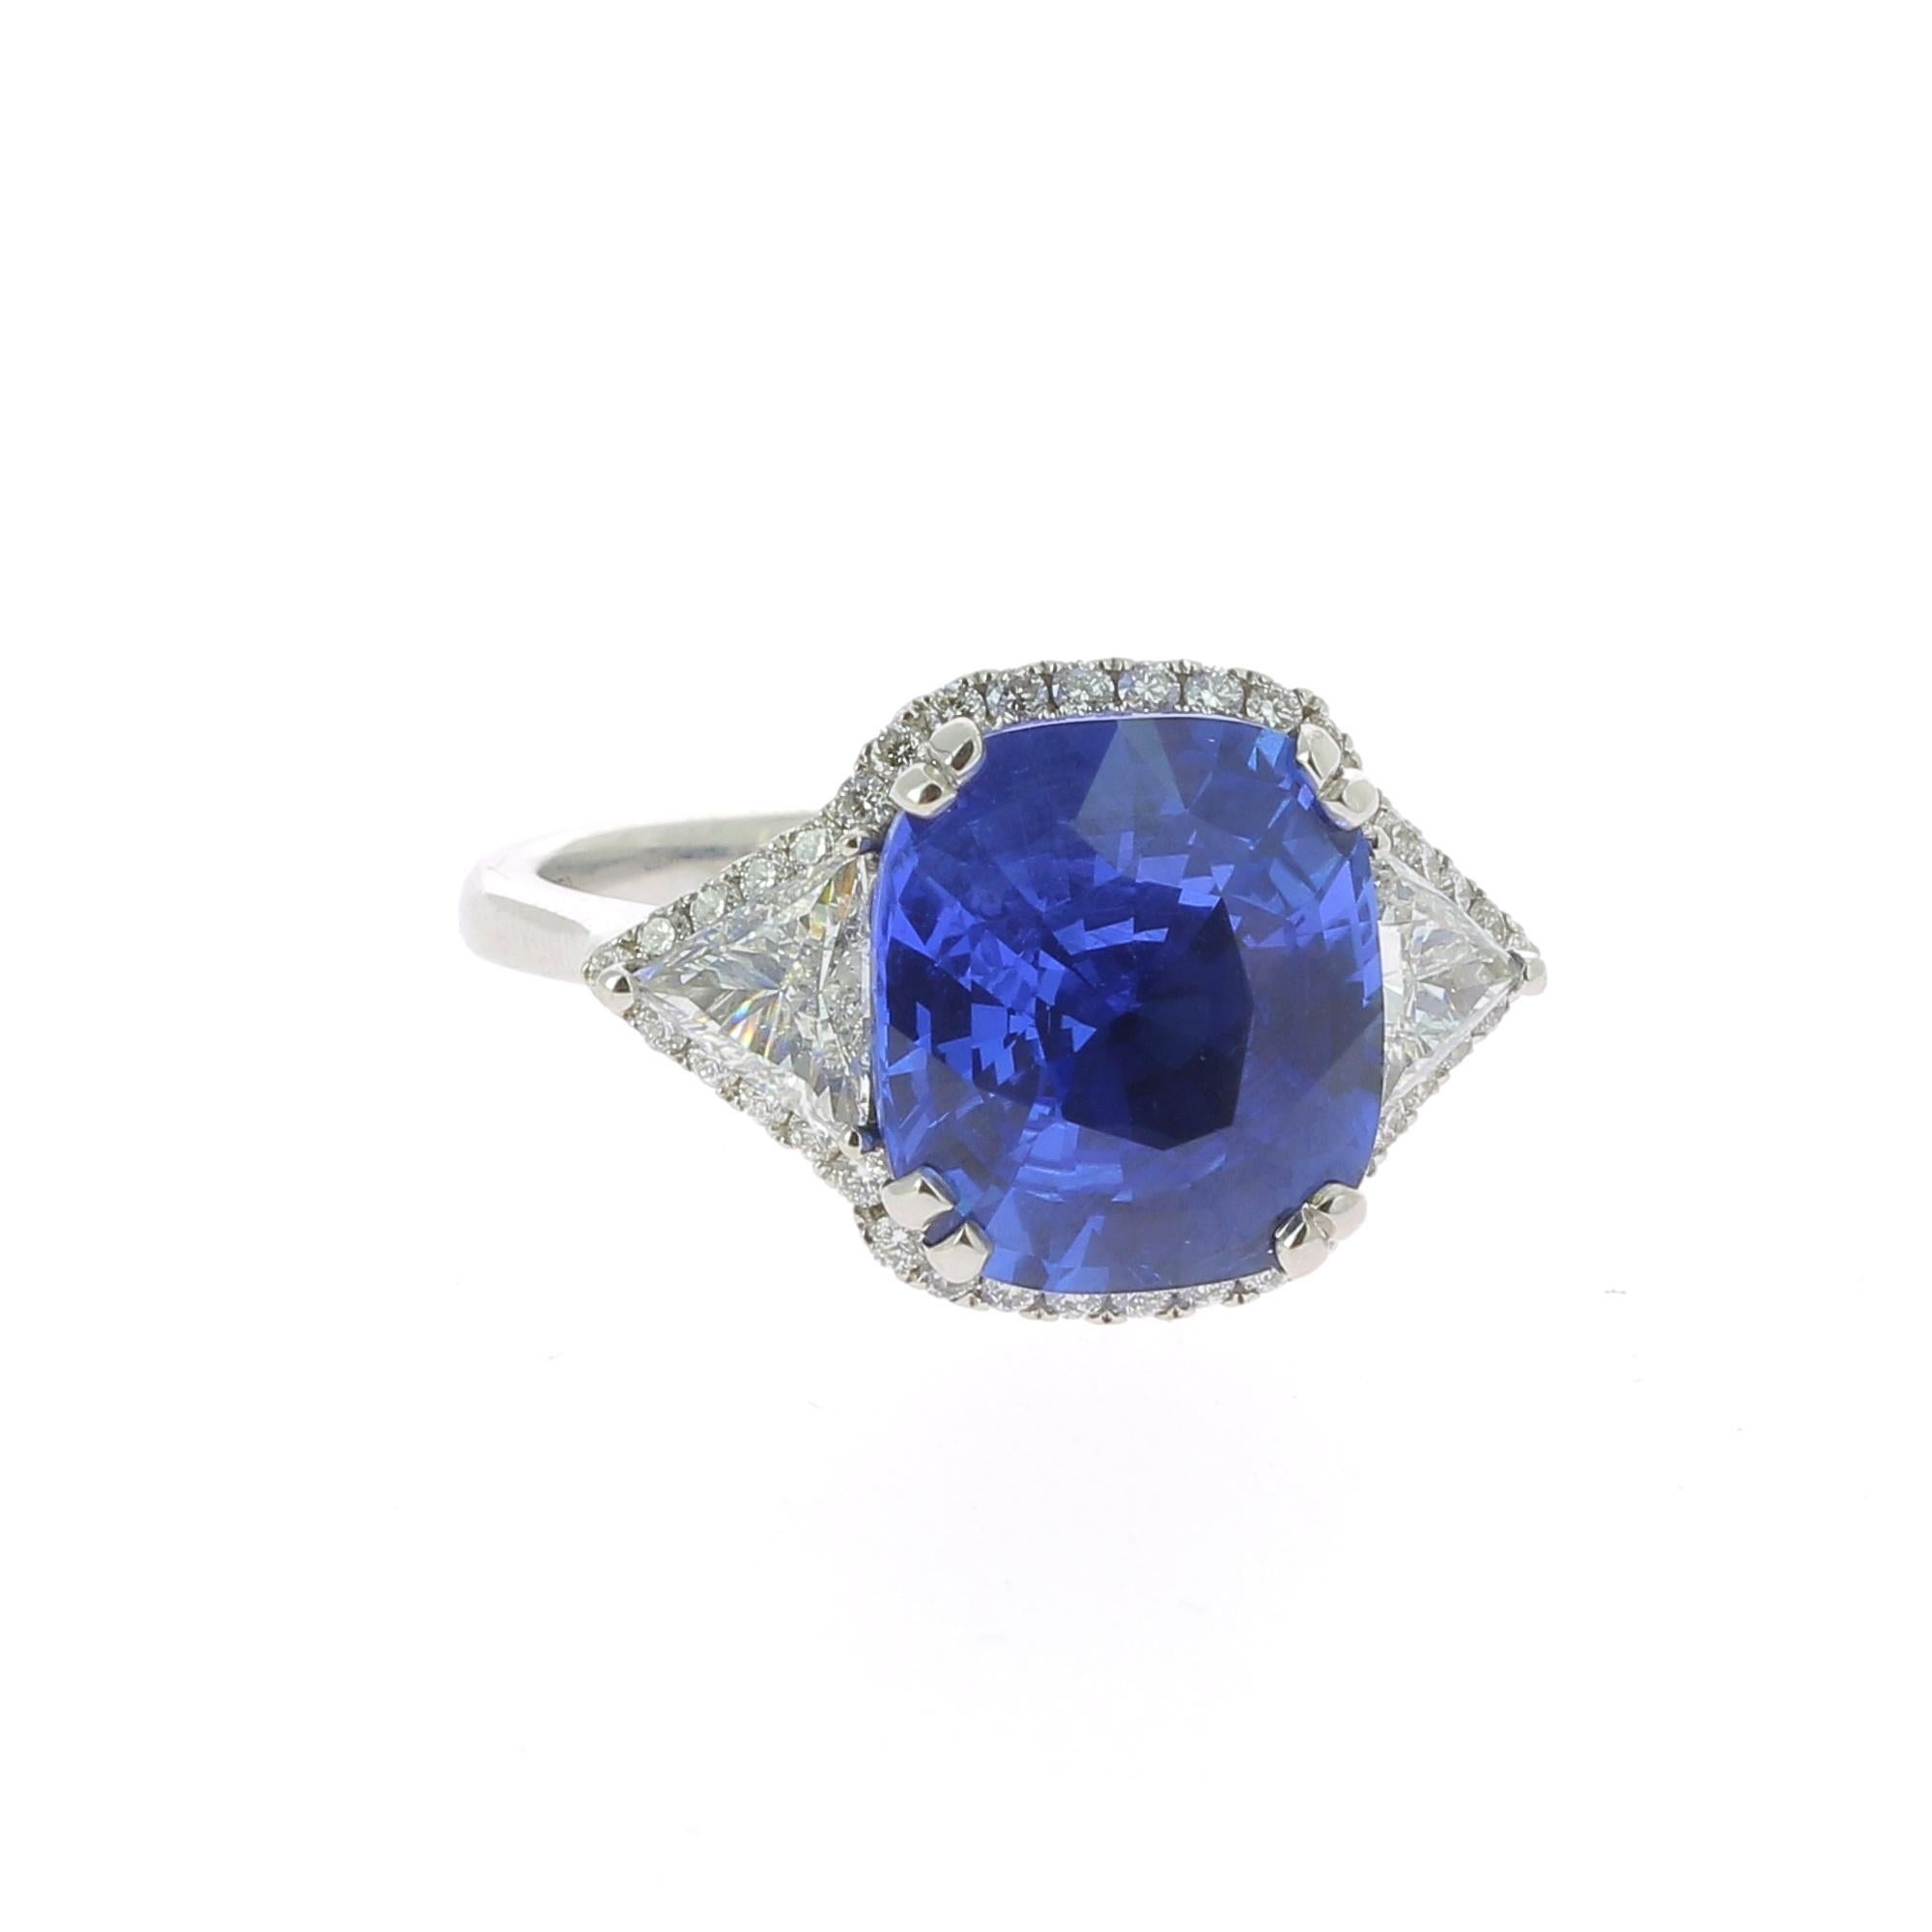 A Large and an amazing Cushion Blue Sapphire Ring, flanked on each side by a single triangle Diamond and surround by a halo of Diamond weighing 0.32 Carats.
The total weight of the Sapphire is 7.16 Carats, the gemstone is certified as an Intense